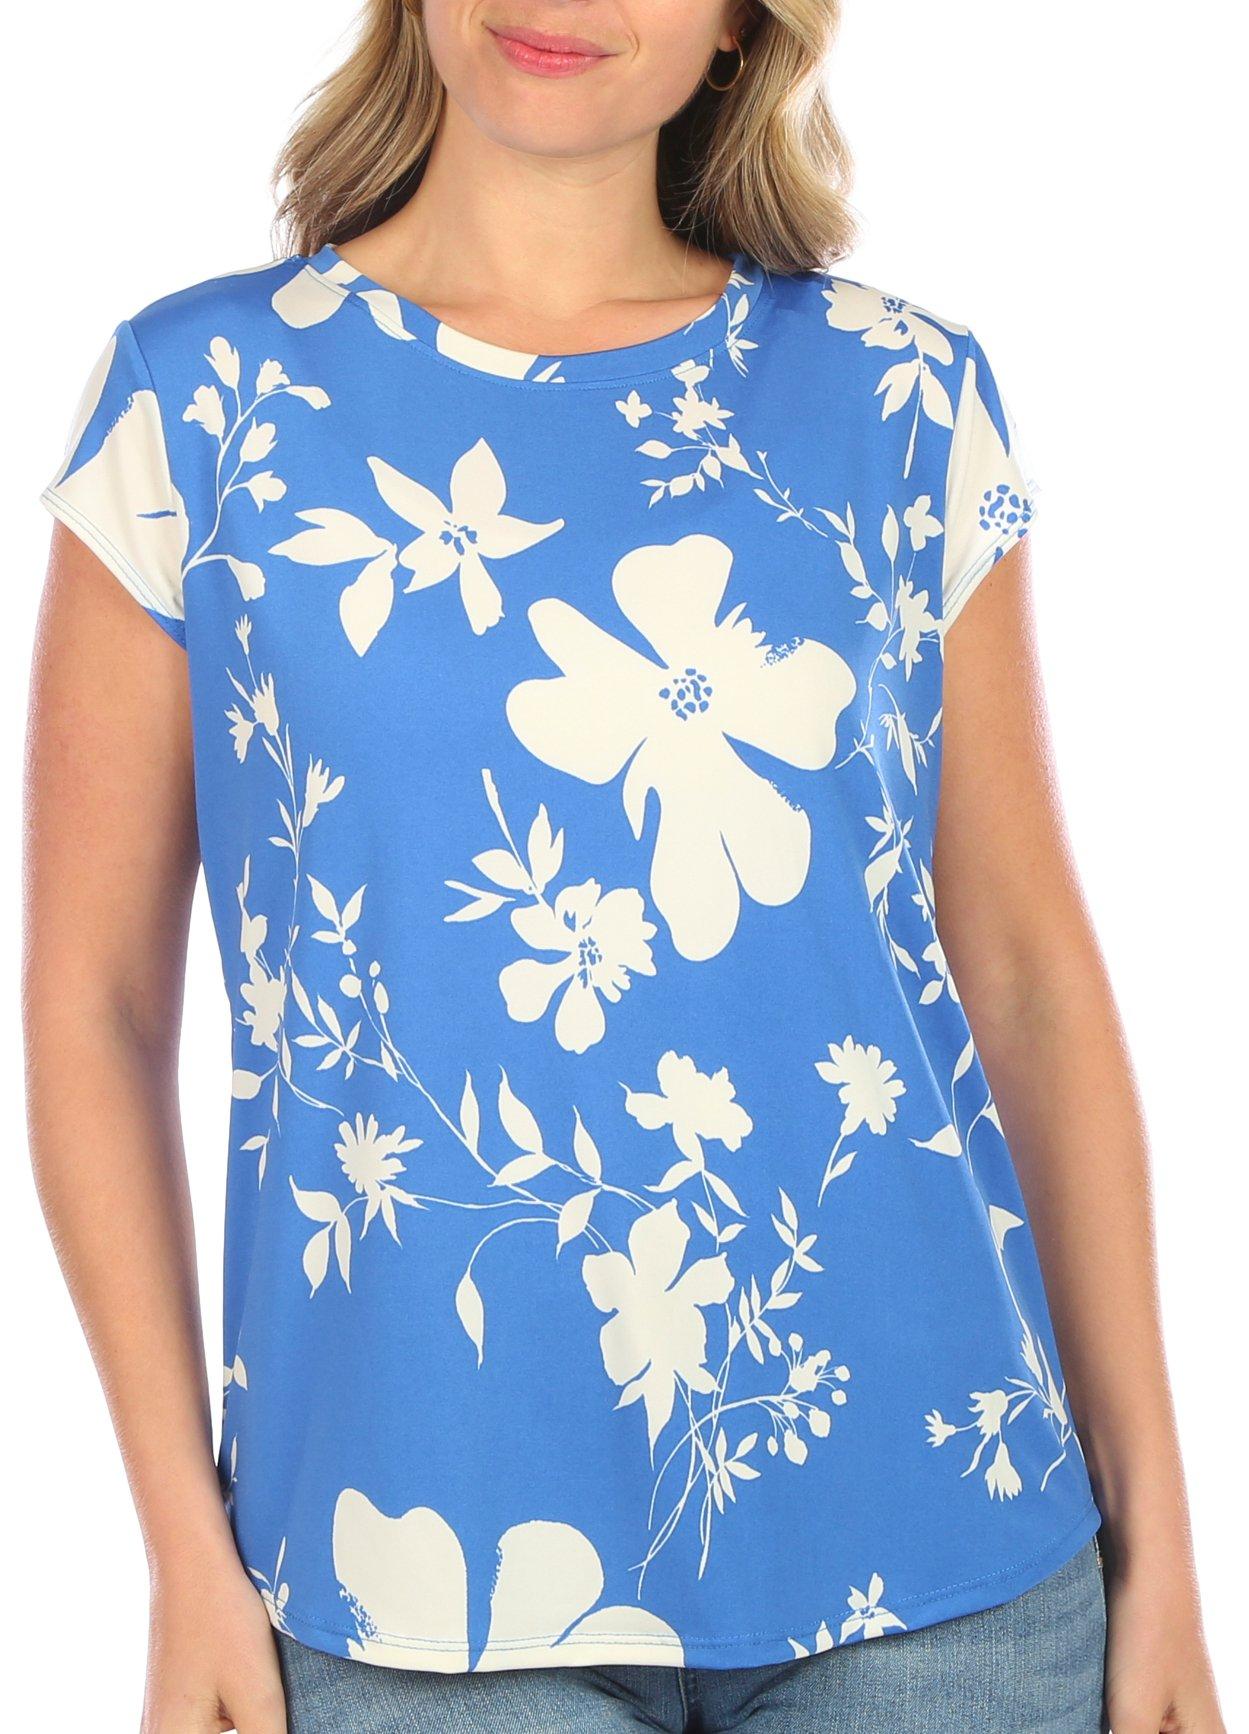 Womens Colorful Floral Print Cap Sleeve Top